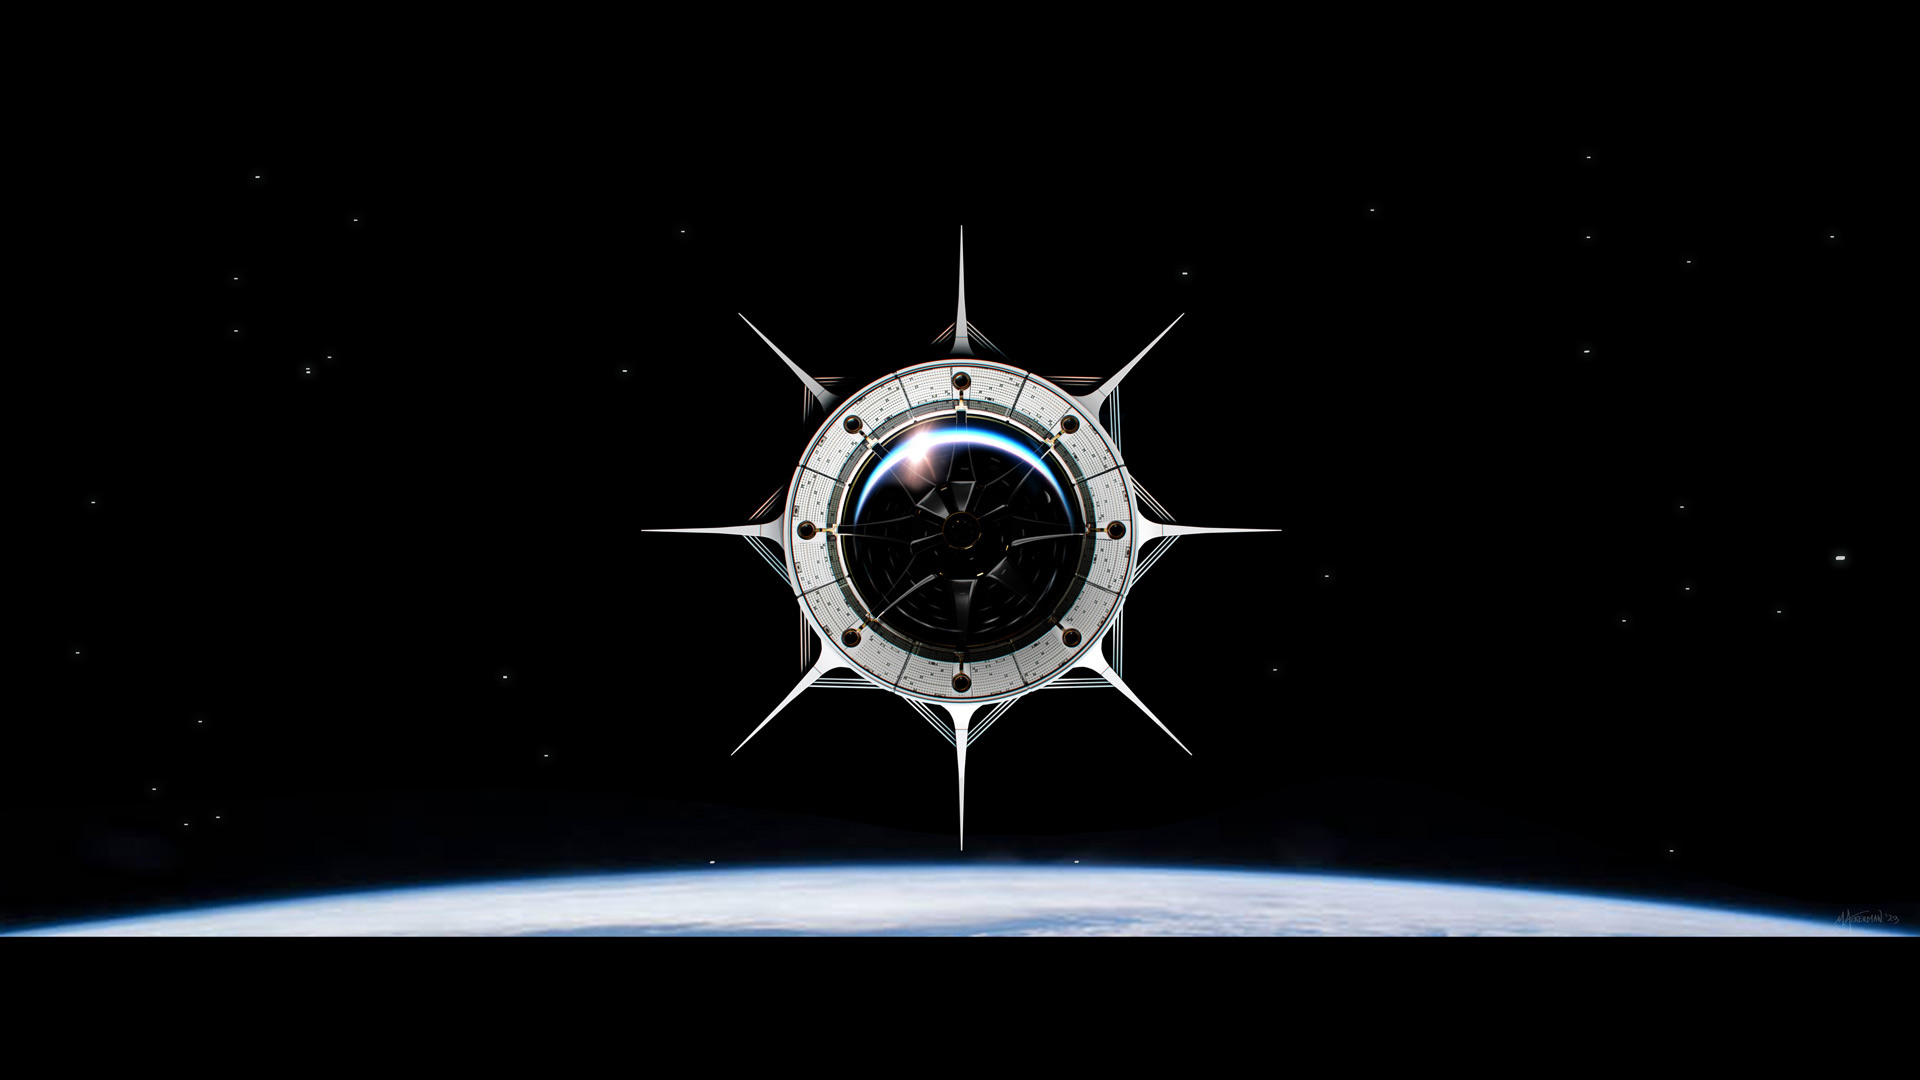 An curcular 8 pronged stargate hovers above the earth, awaiting activation.